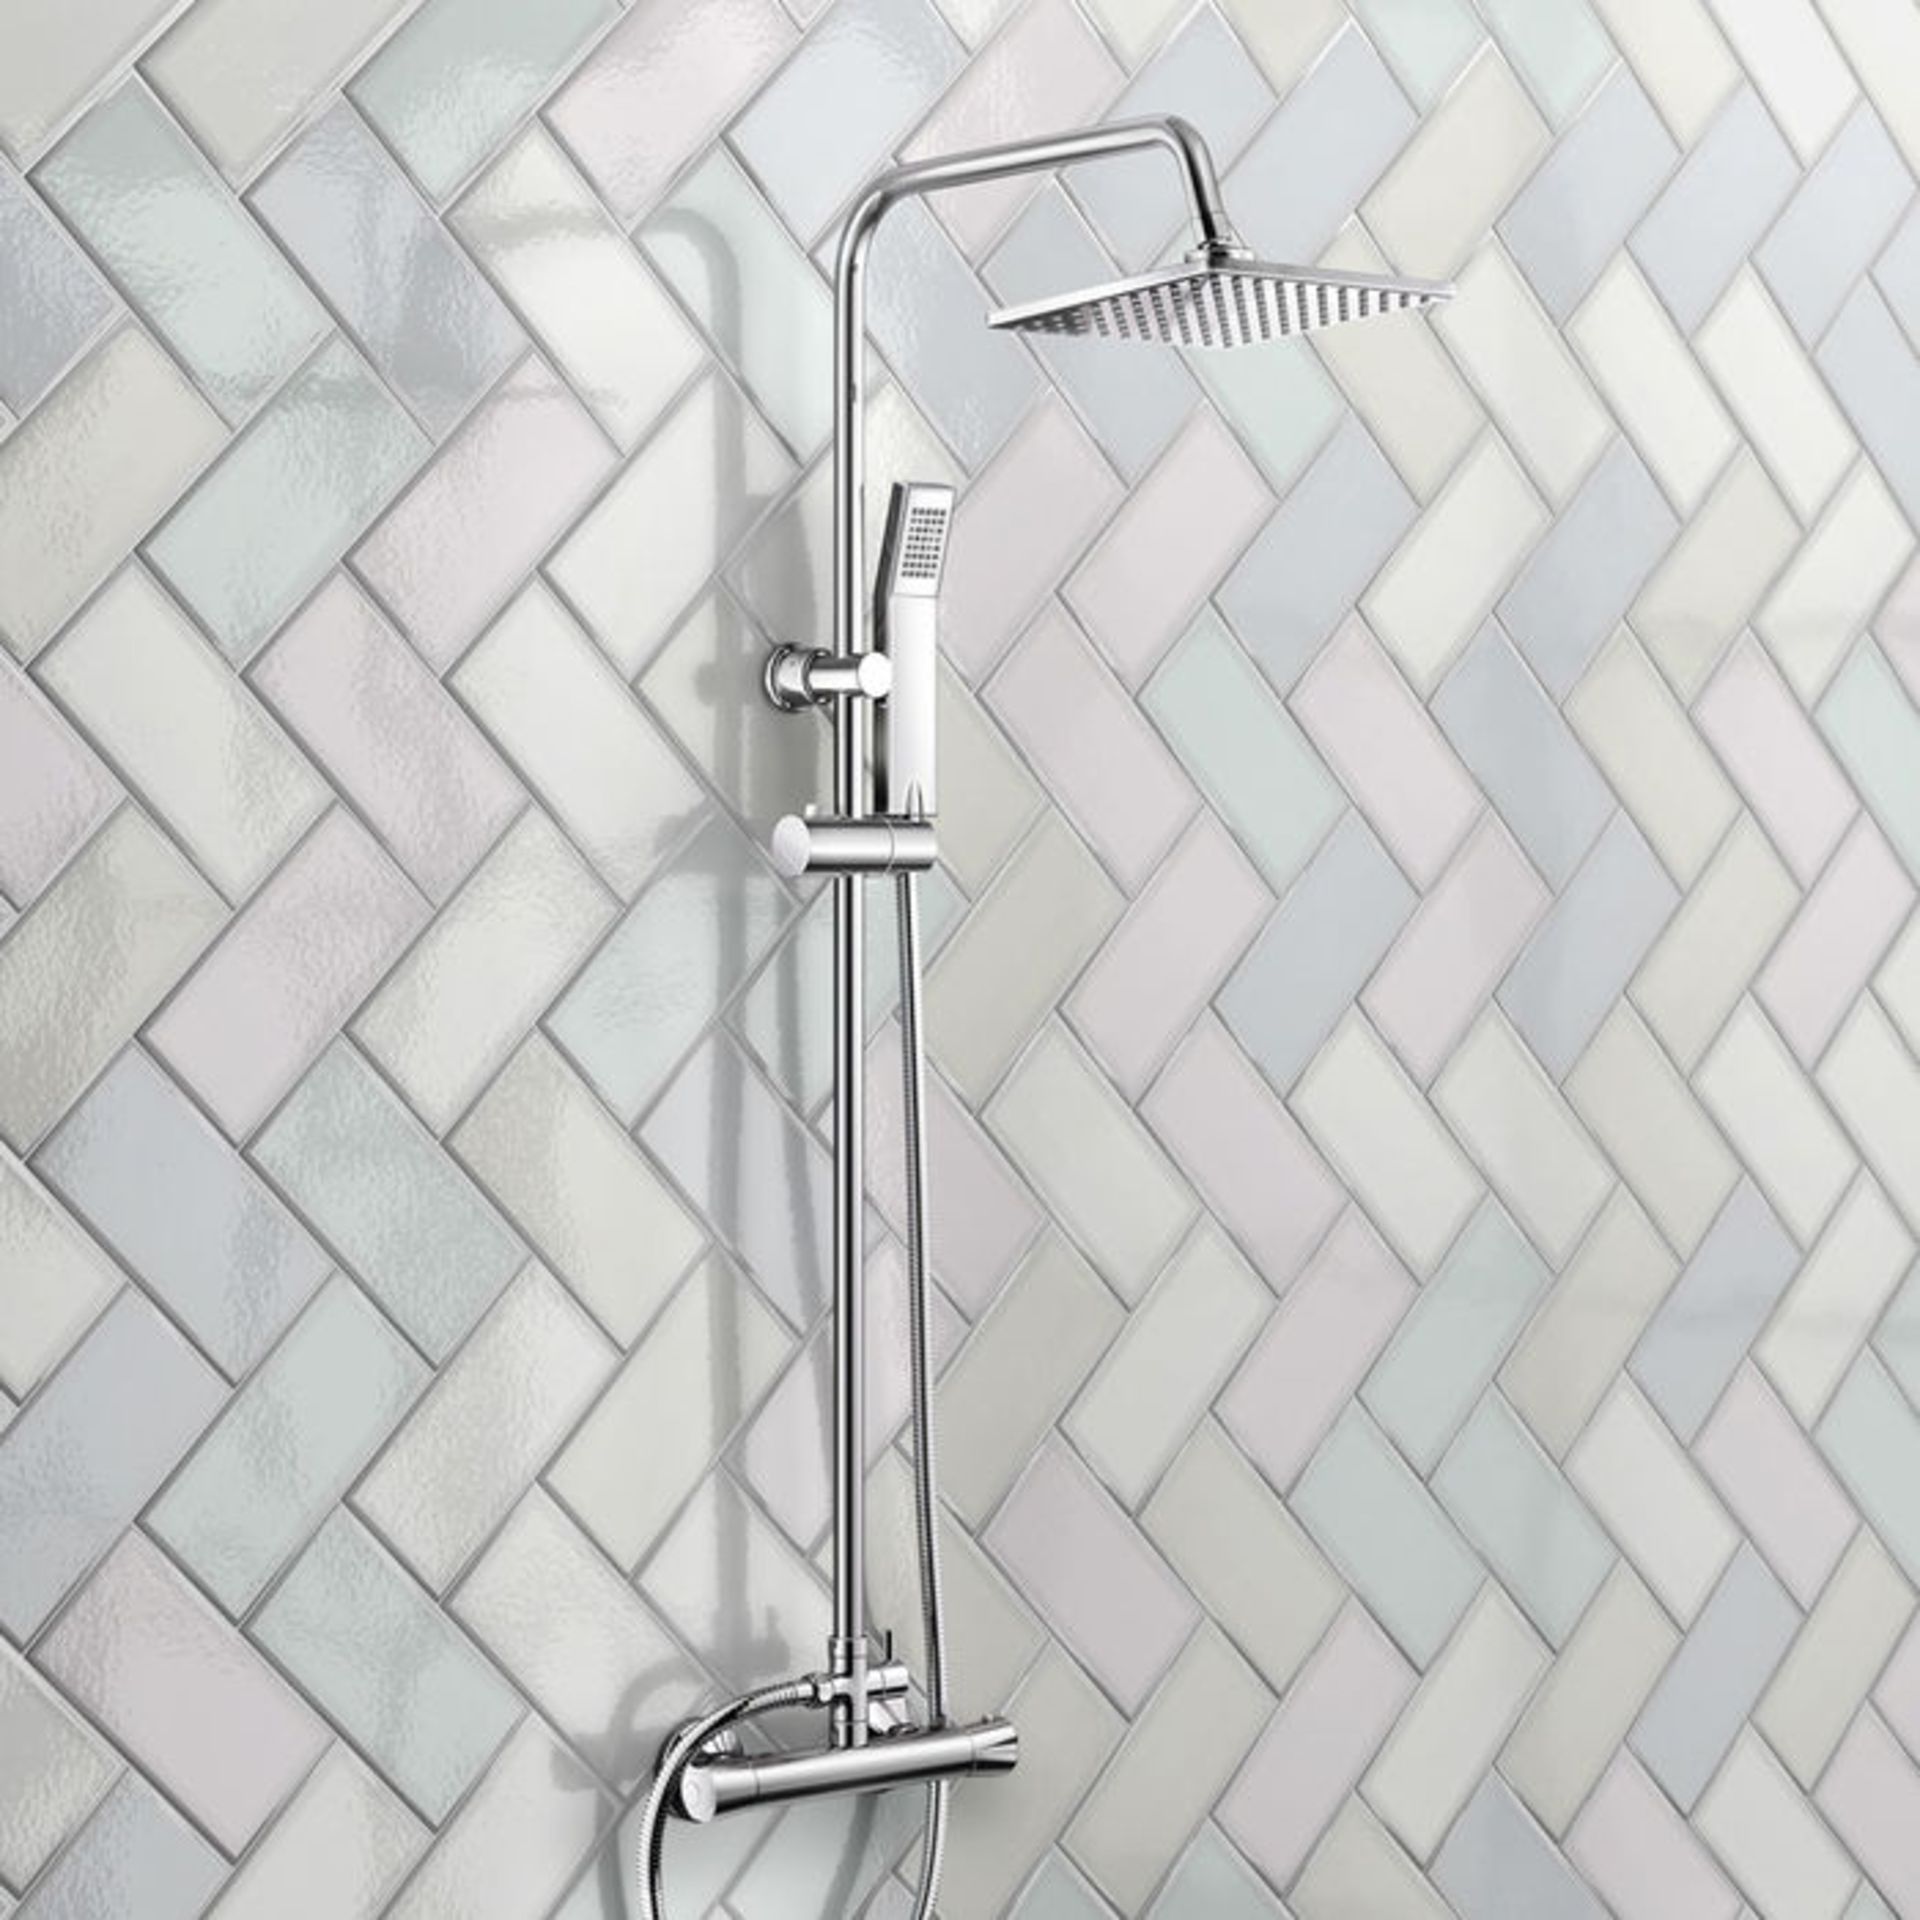 (TS309) Square Exposed Thermostatic Shower Kit & Medium Head. Curved features and contemporary - Image 3 of 3